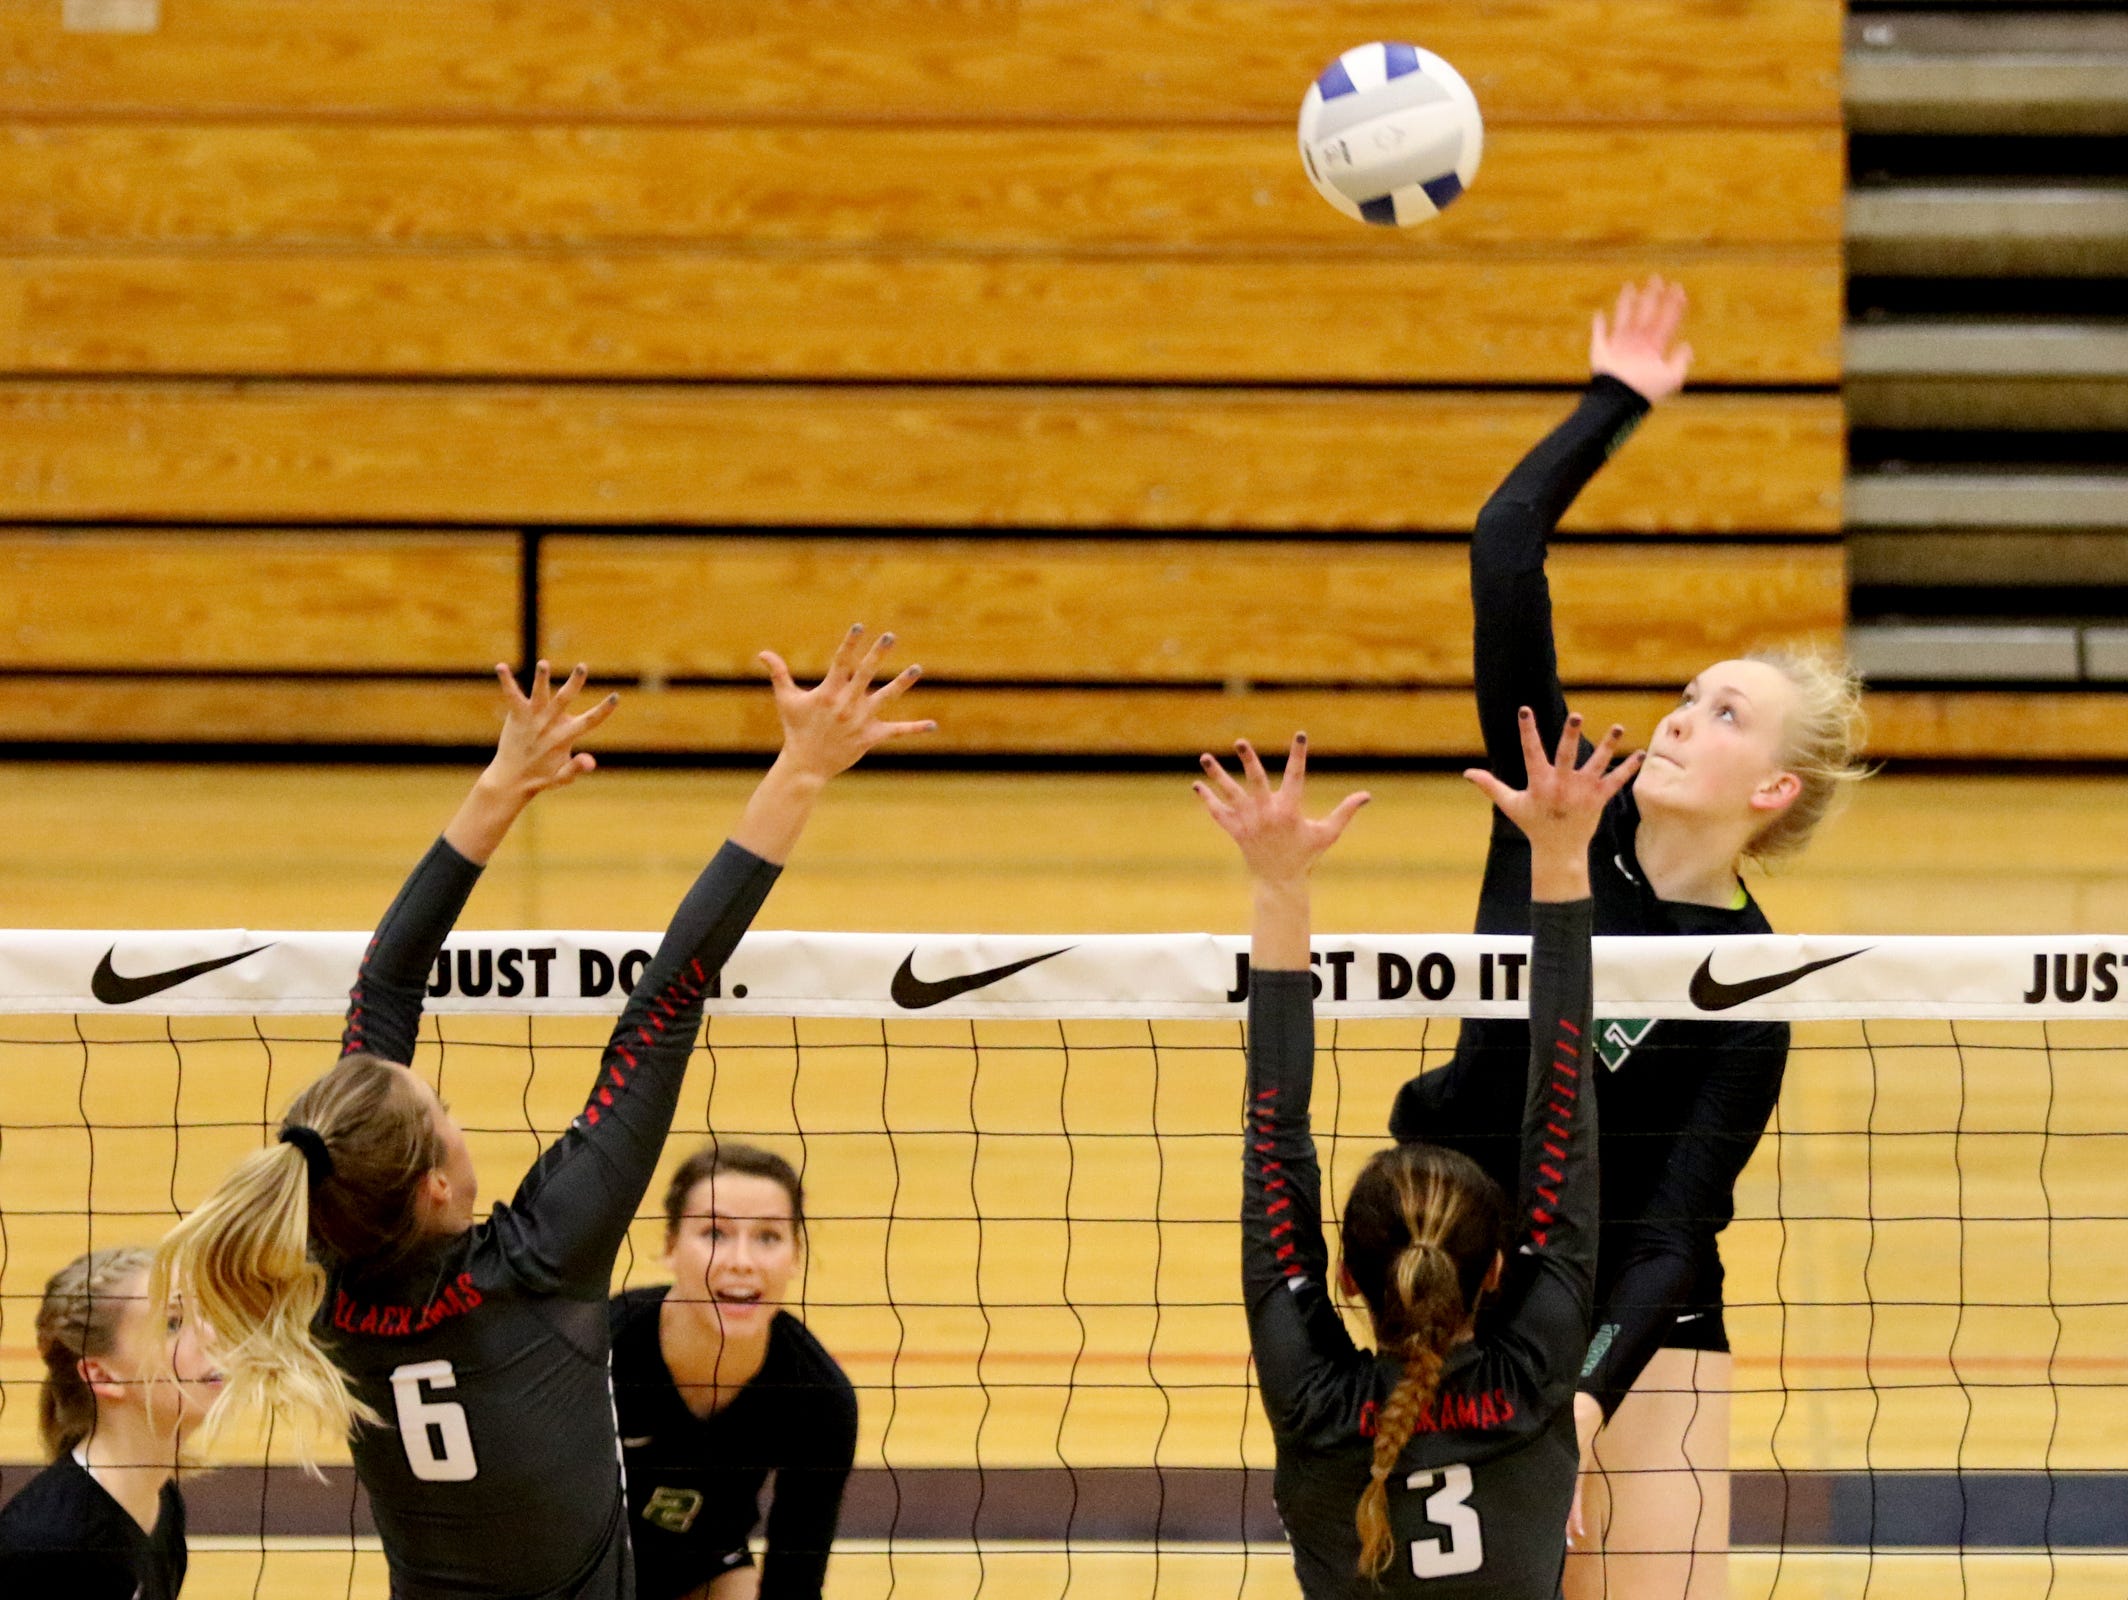 West Salem's Paige Whipple (12) spikes the ball past Clackamas' Calla Meyer (6) and Kayley Andersen (3) in the OSAA Class 6A quarterfinal volleyball match of Clackamas vs. West Salem at Liberty High School in Hillsboro on Friday, Nov. 4, 2016. West Salem lost in four sets.